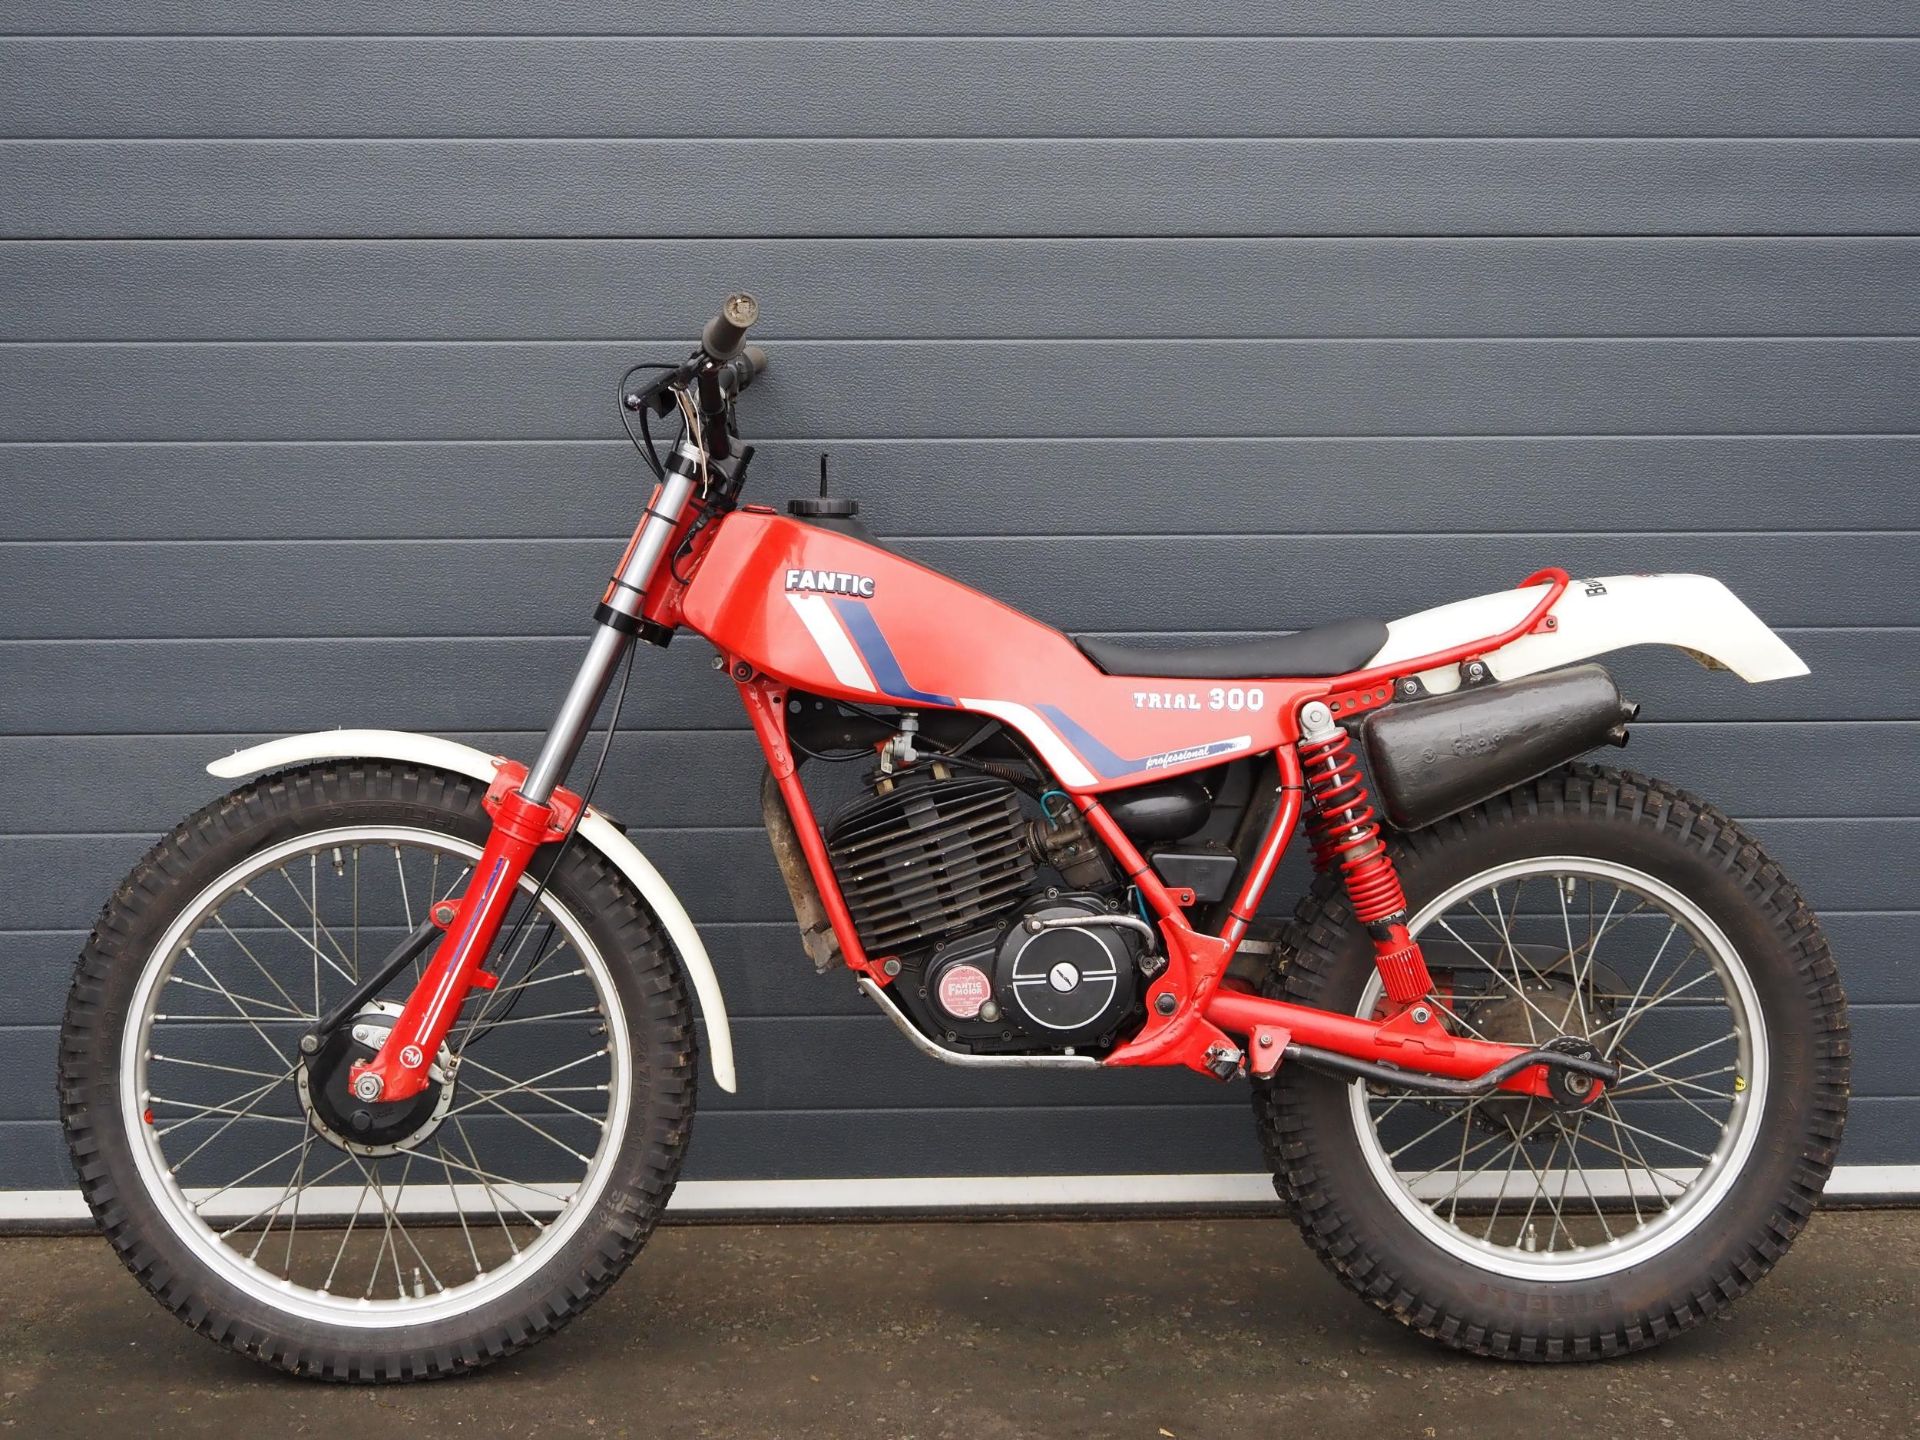 Fantic Trials 300 professional bike. 249 cc Frame No. 34001839 Engine No. 001842 Fitted with - Image 5 of 5